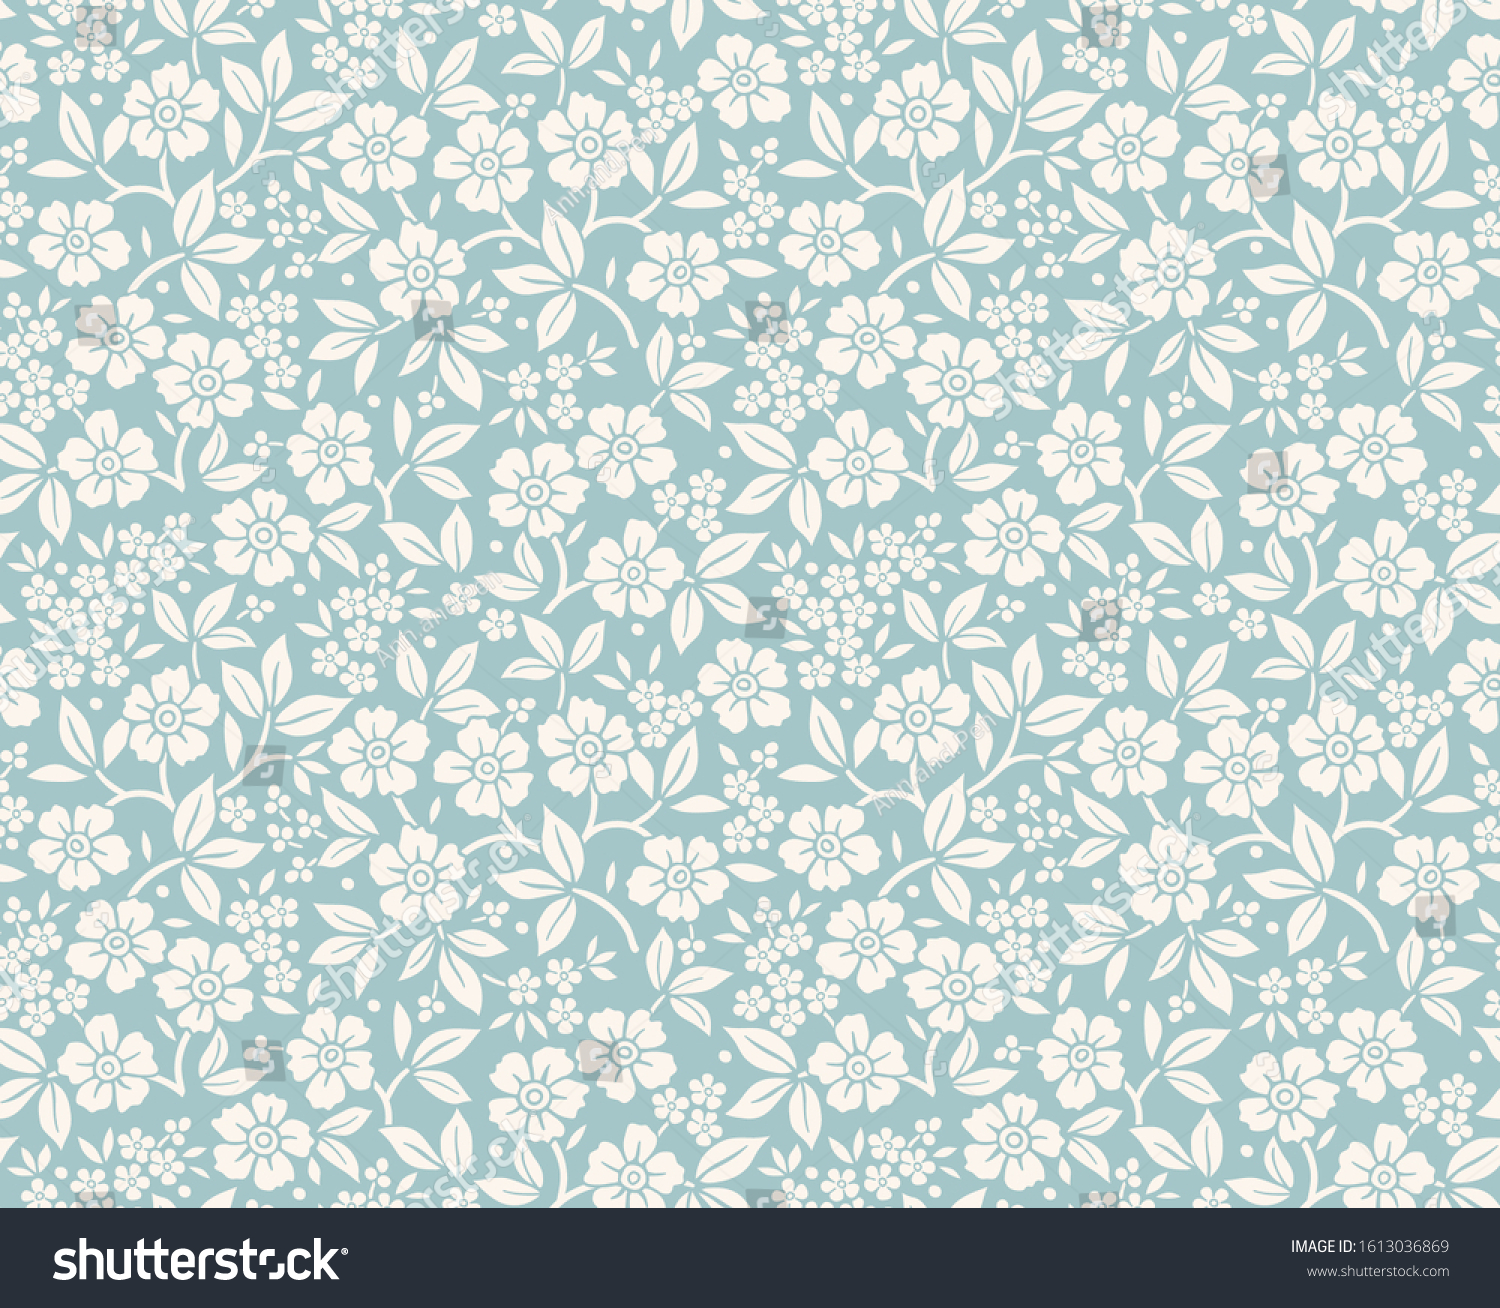 Floral pattern. Pretty flowers on gray blue background. Printing with small white flowers. Ditsy print. Seamless vector texture. Spring bouquet.